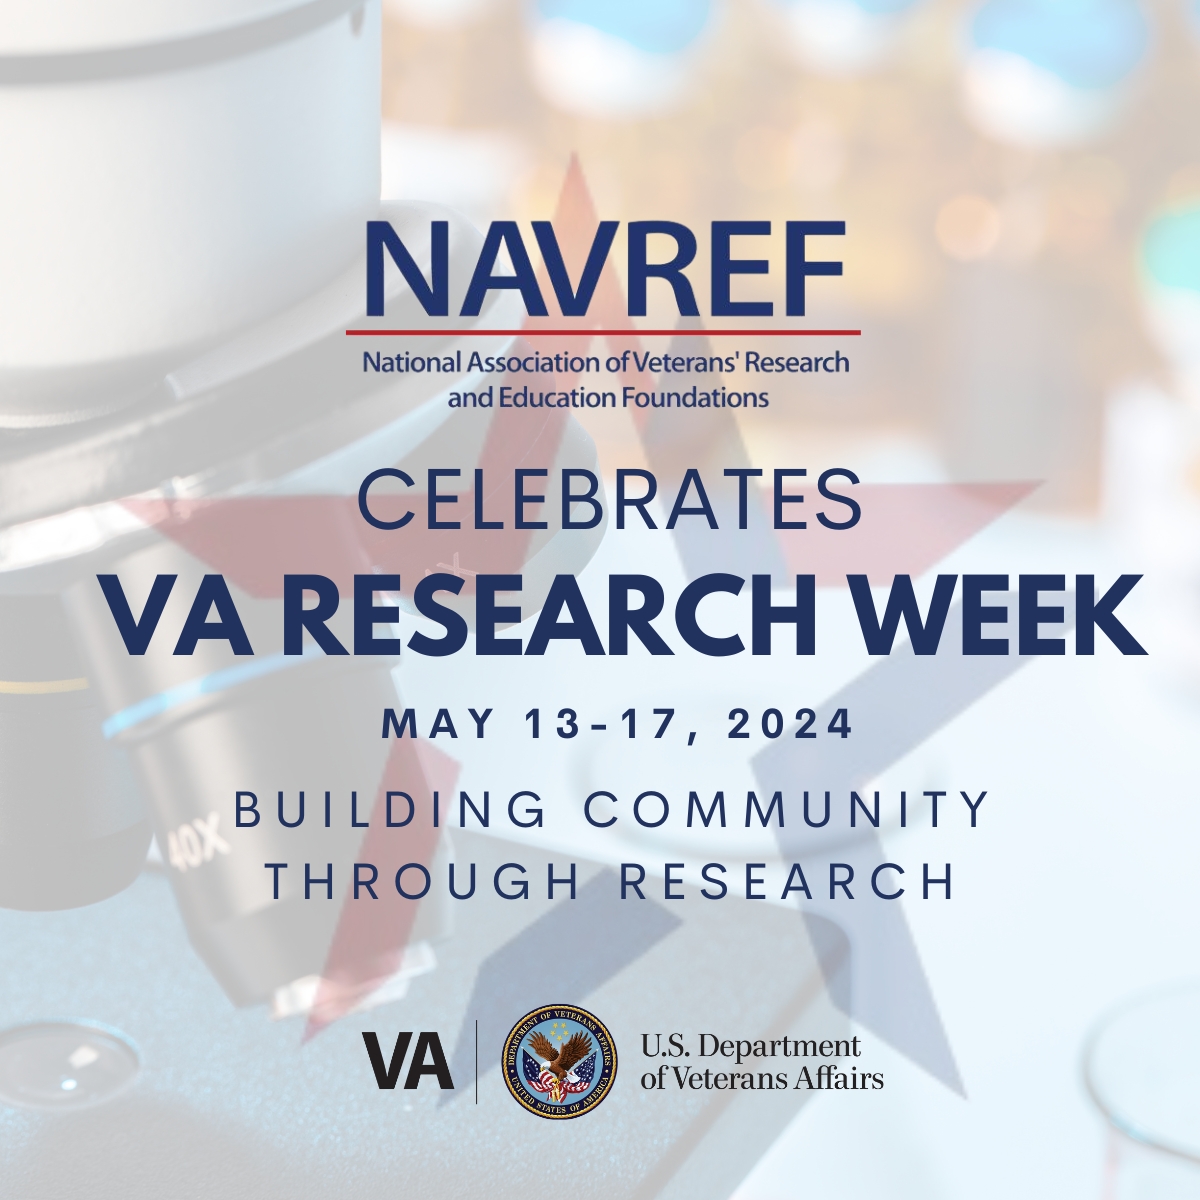 Happy @VAResearch Week! May 13-17, we celebrate VA #research and #education. Theme: “Building Community Through Research.” Looking forward to presentations with @DeptVetAffairs  Secretary Denis McDonough, recognizing contributions to #Veteran and #HealthScience communities.